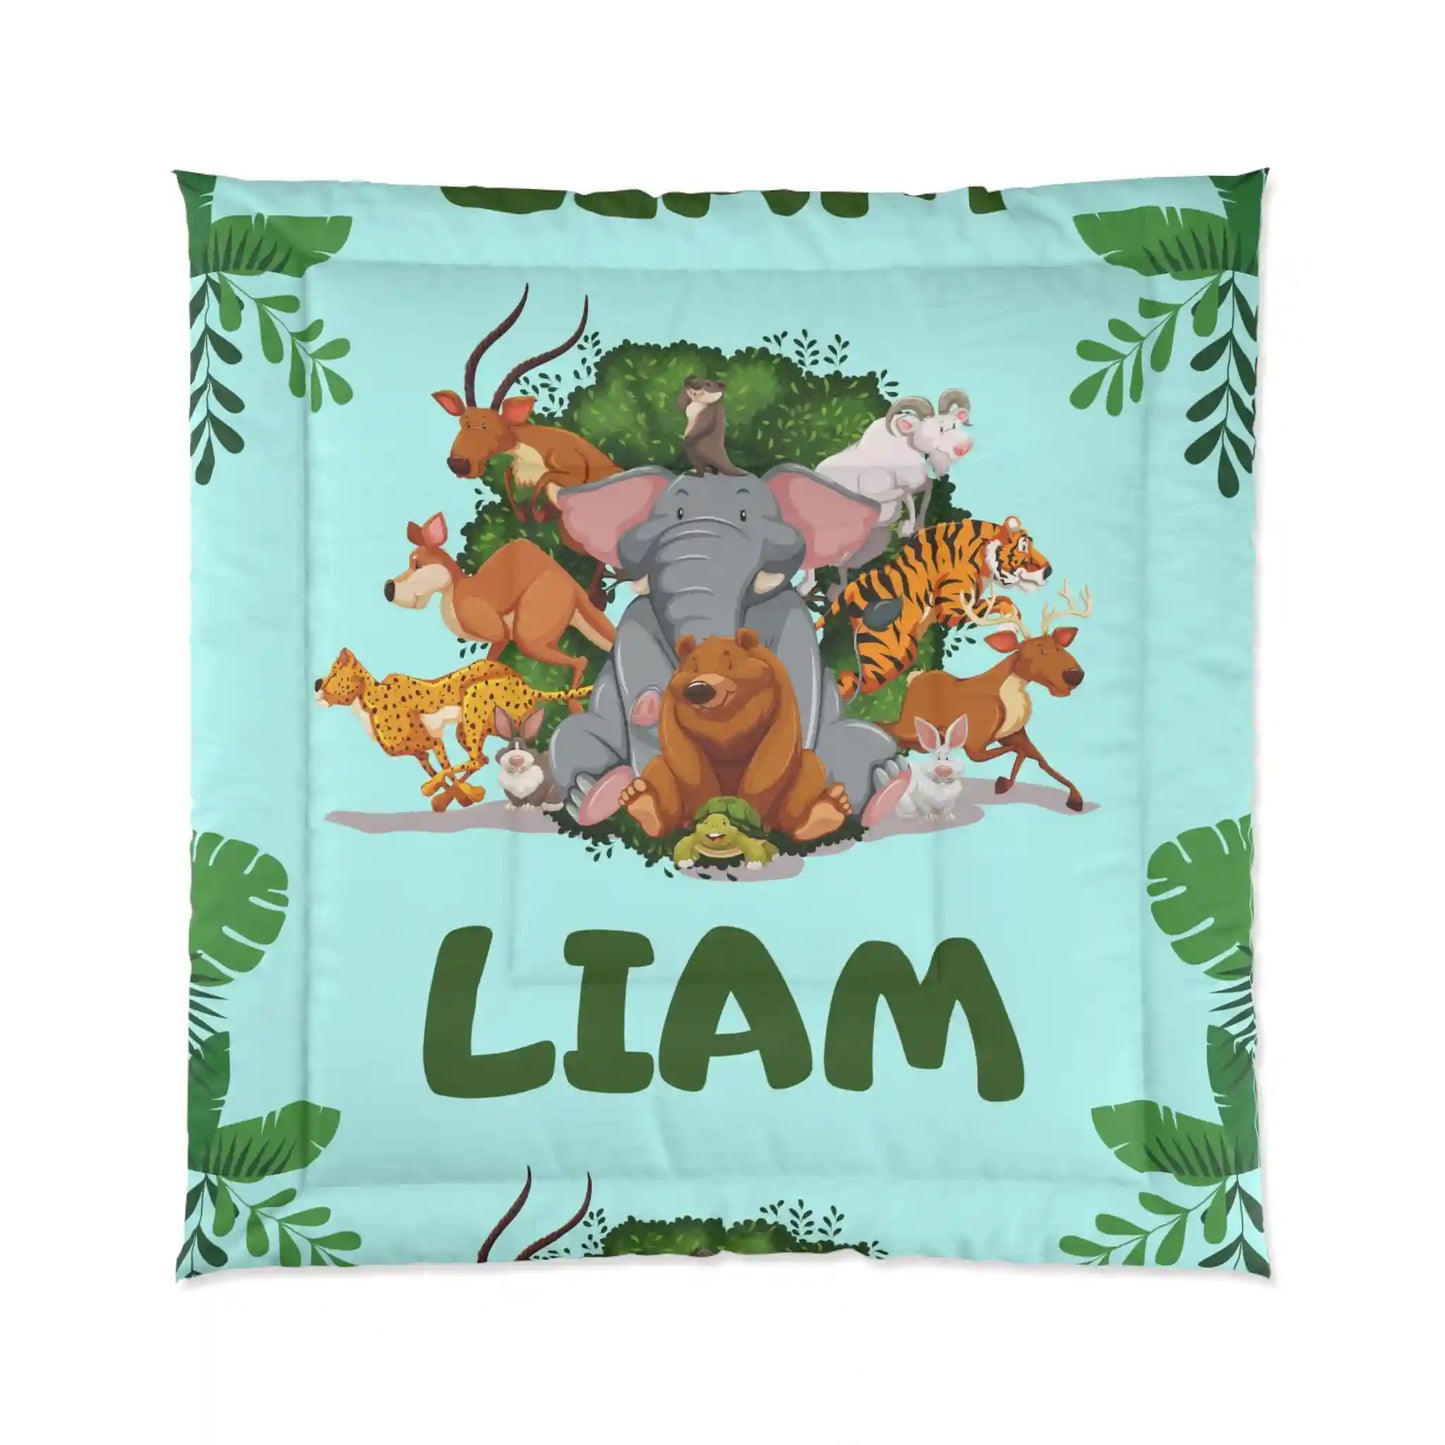 Comforter, quilting, laying, bed quilt (Liam) - Personalize with your name